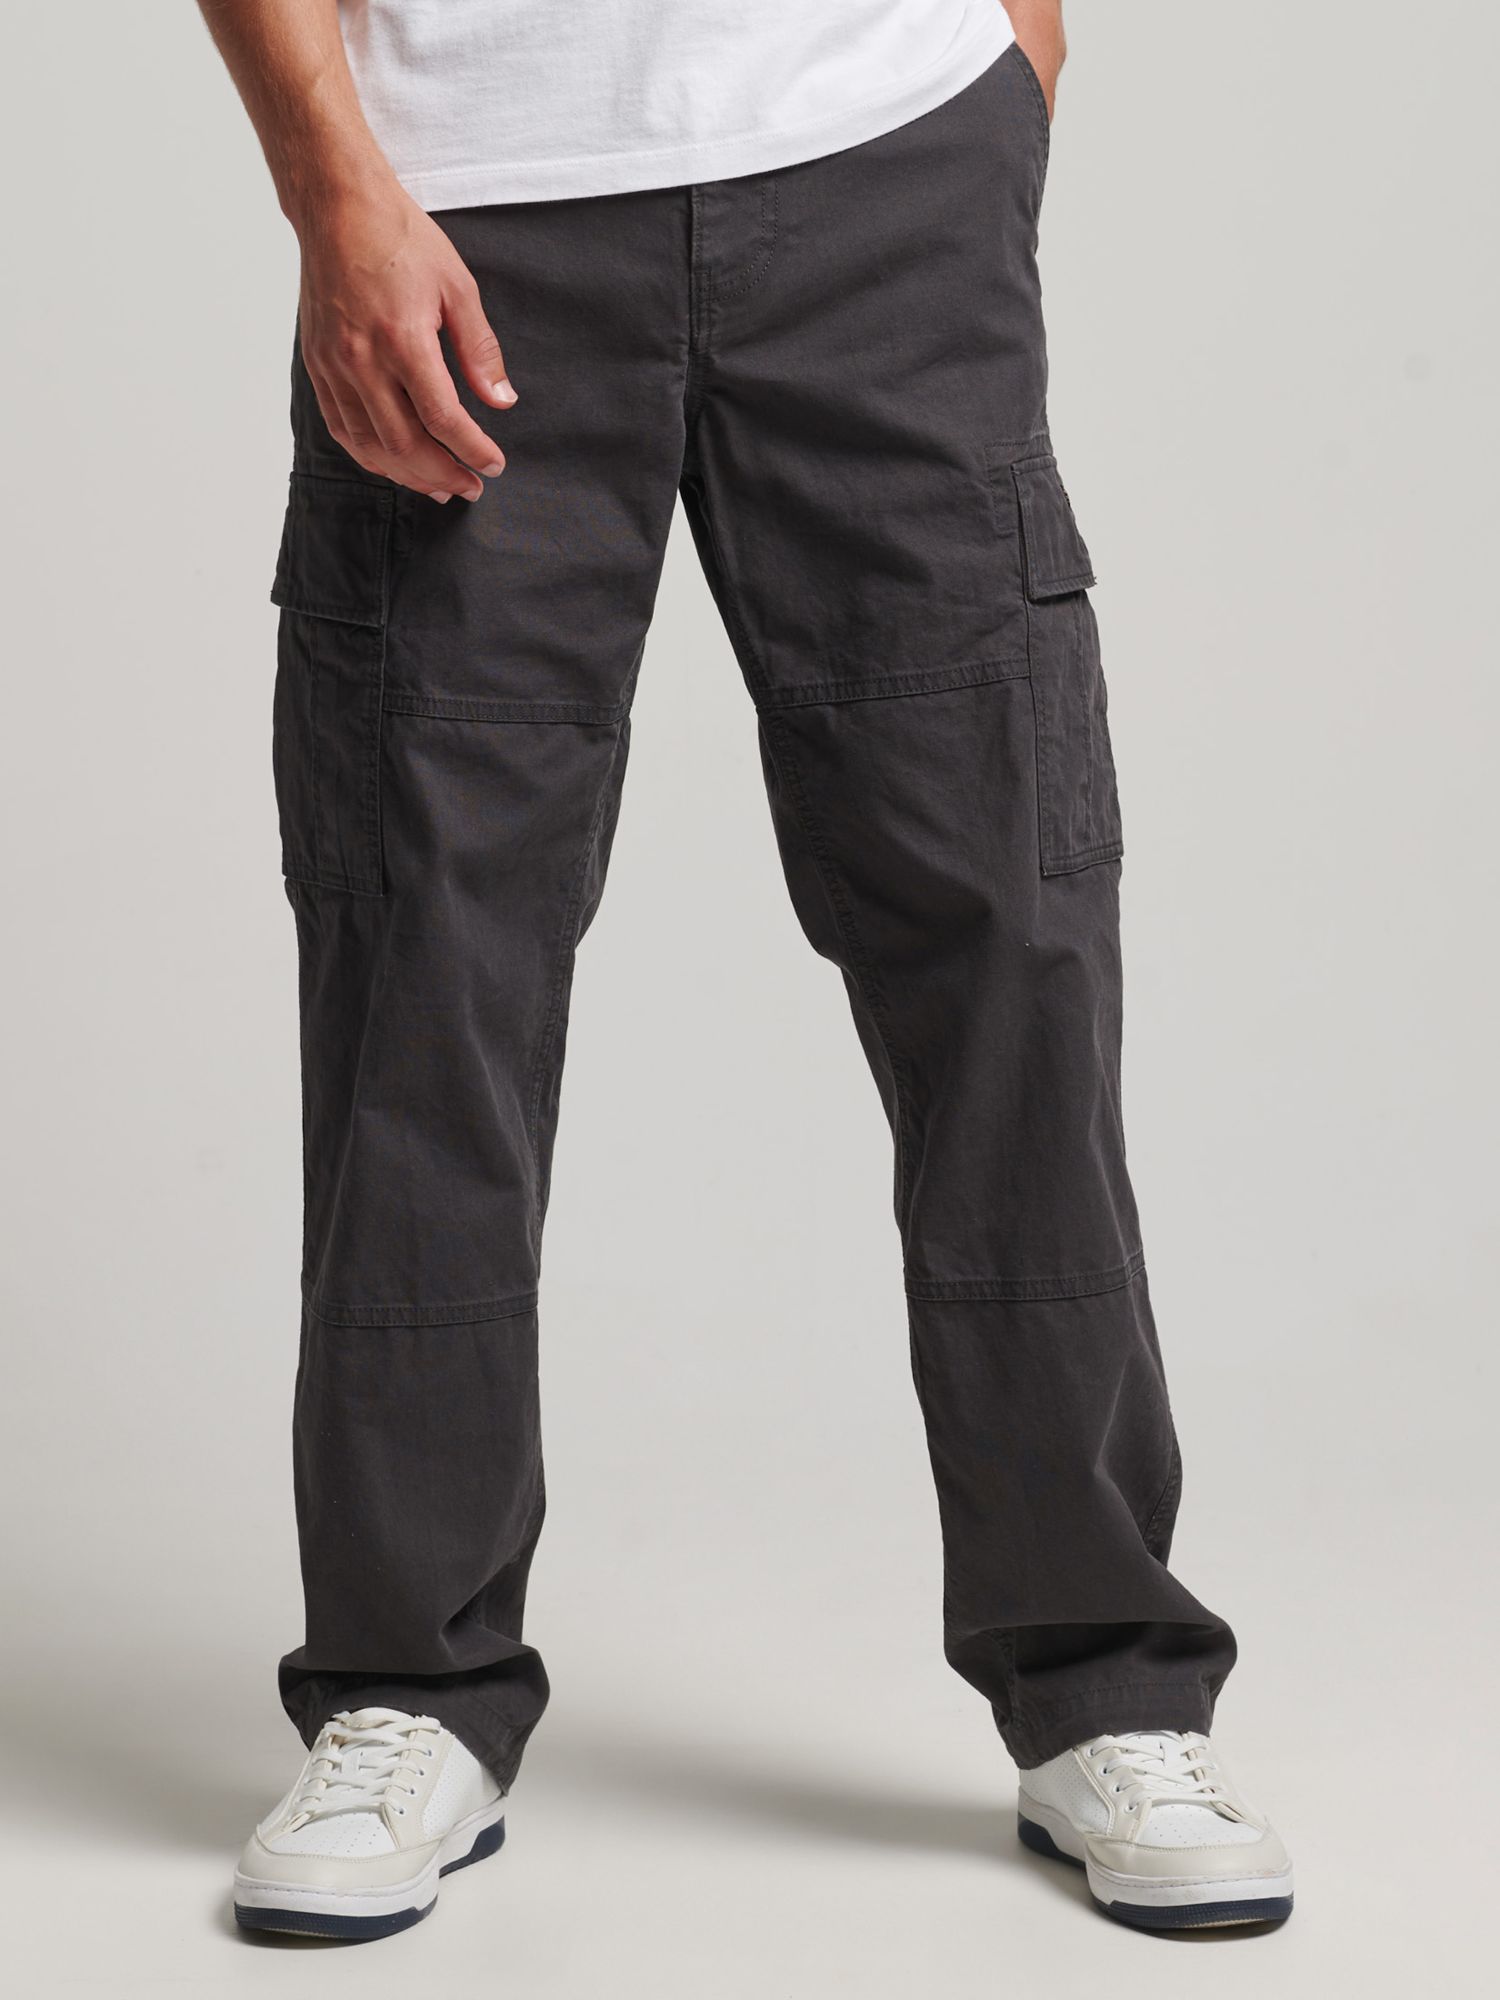 Superdry Organic Cotton Baggy Cargo Pants